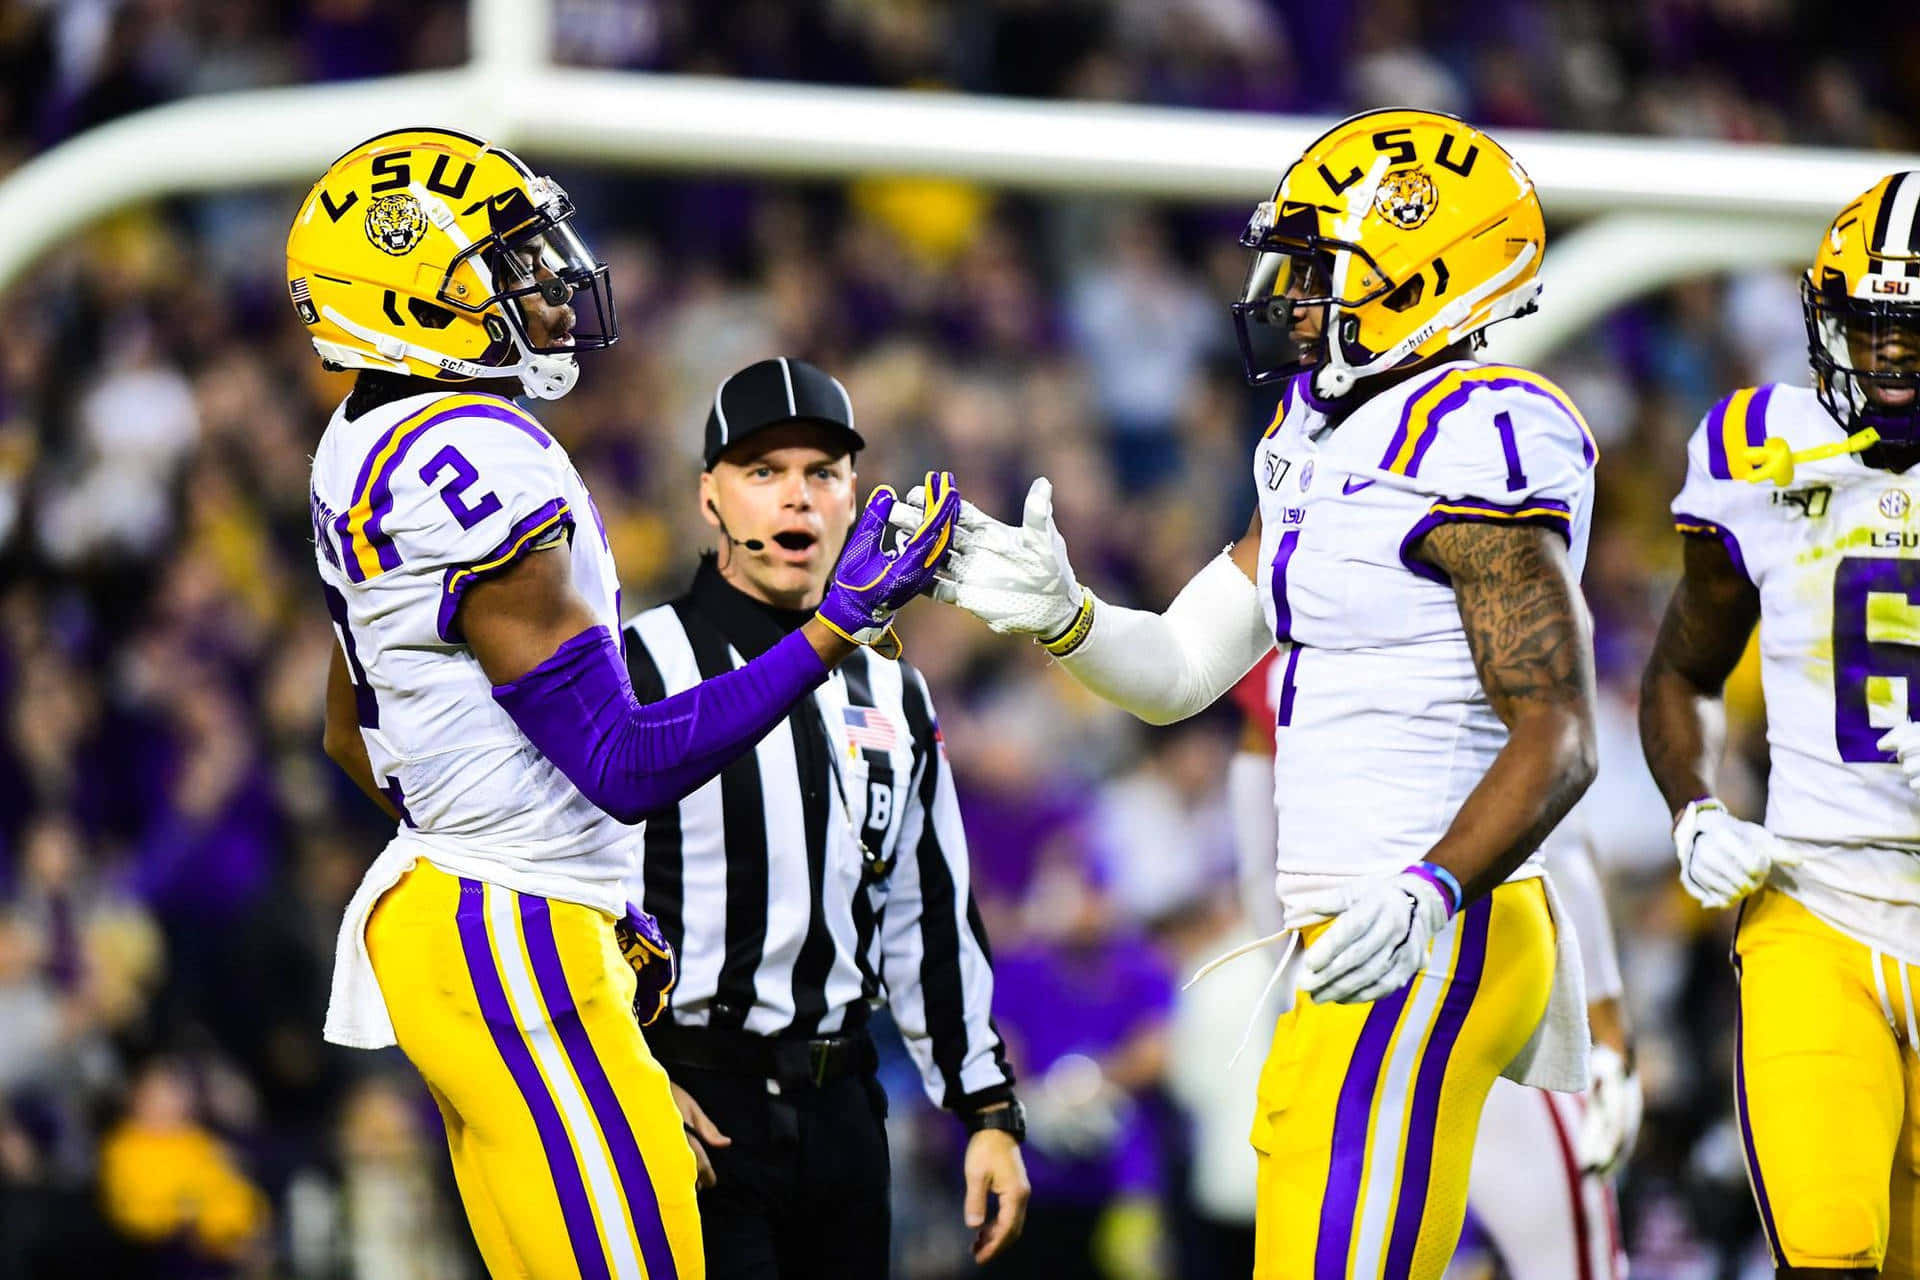 Lsu Football Players Are Celebrating After A Touchdown Wallpaper